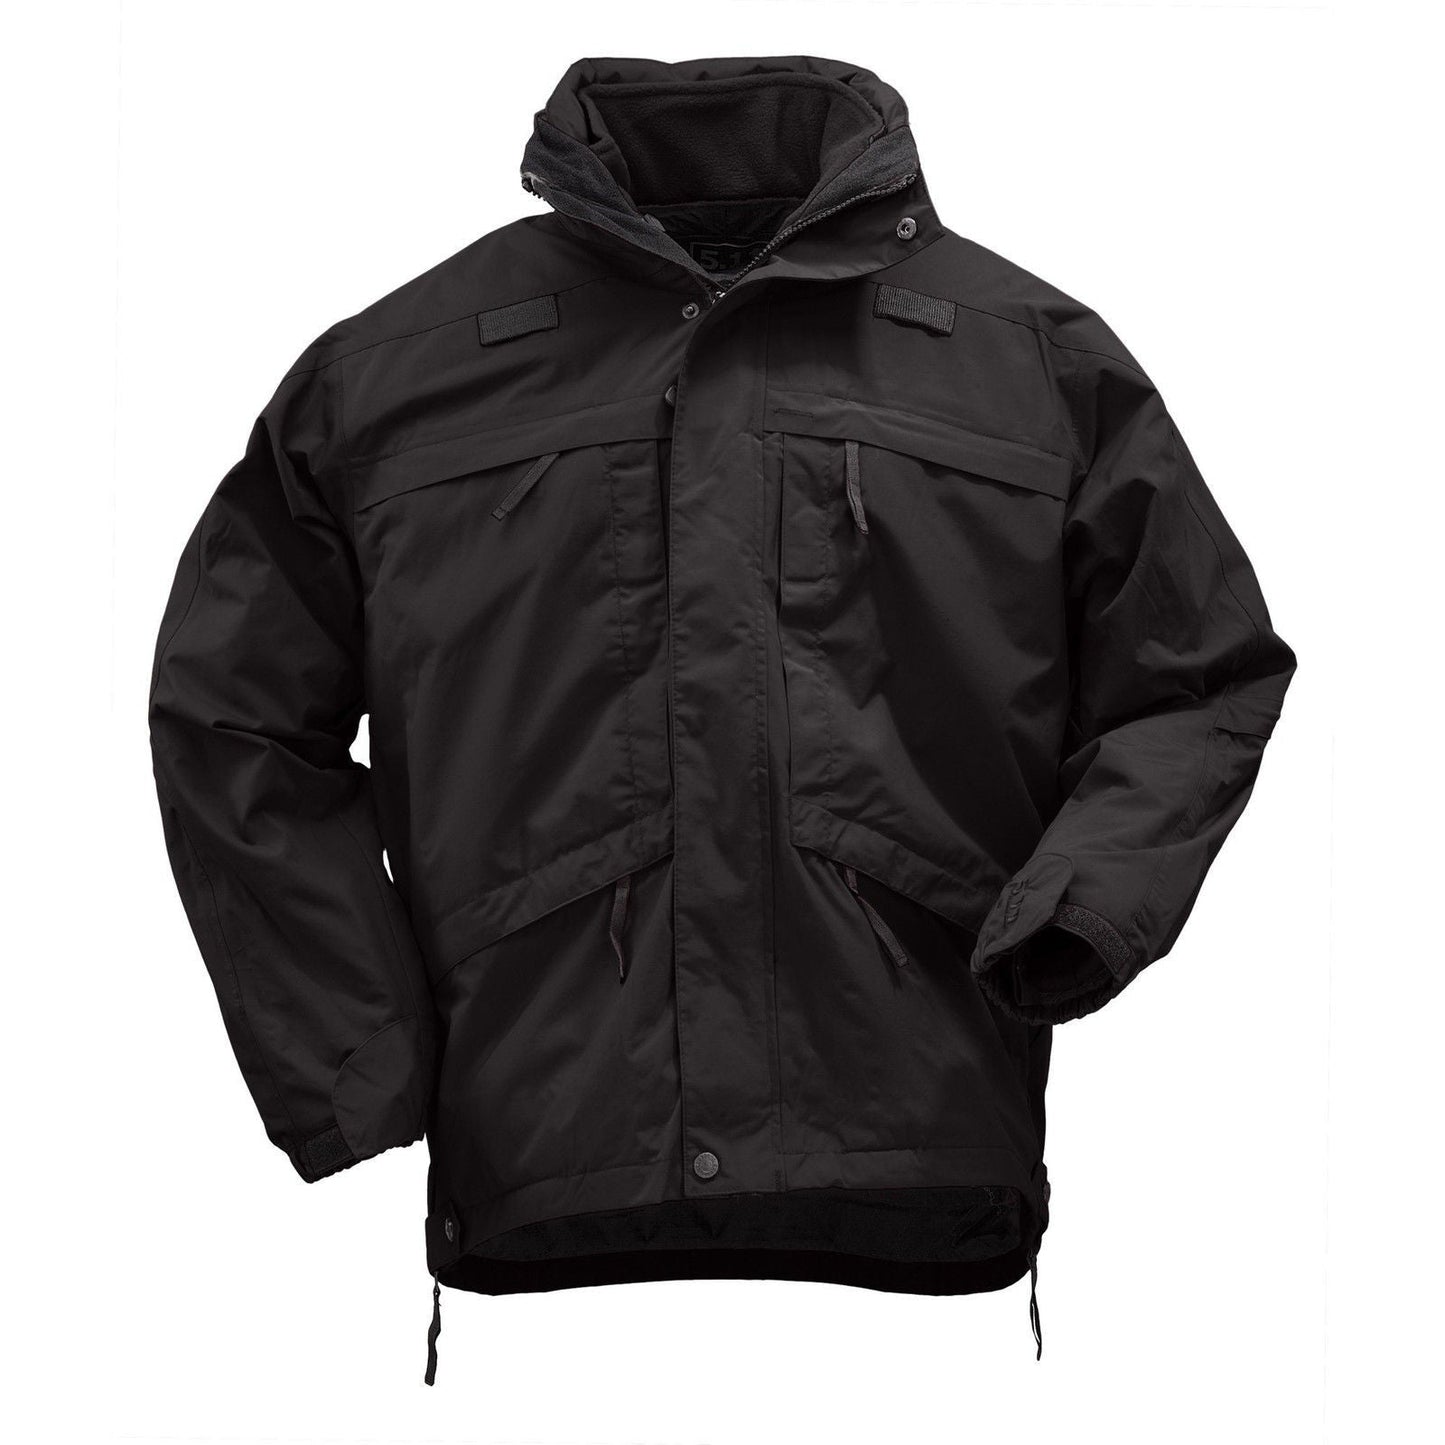 5.11 Tactical 3-In-1 Parka - All Season Performance Jacket